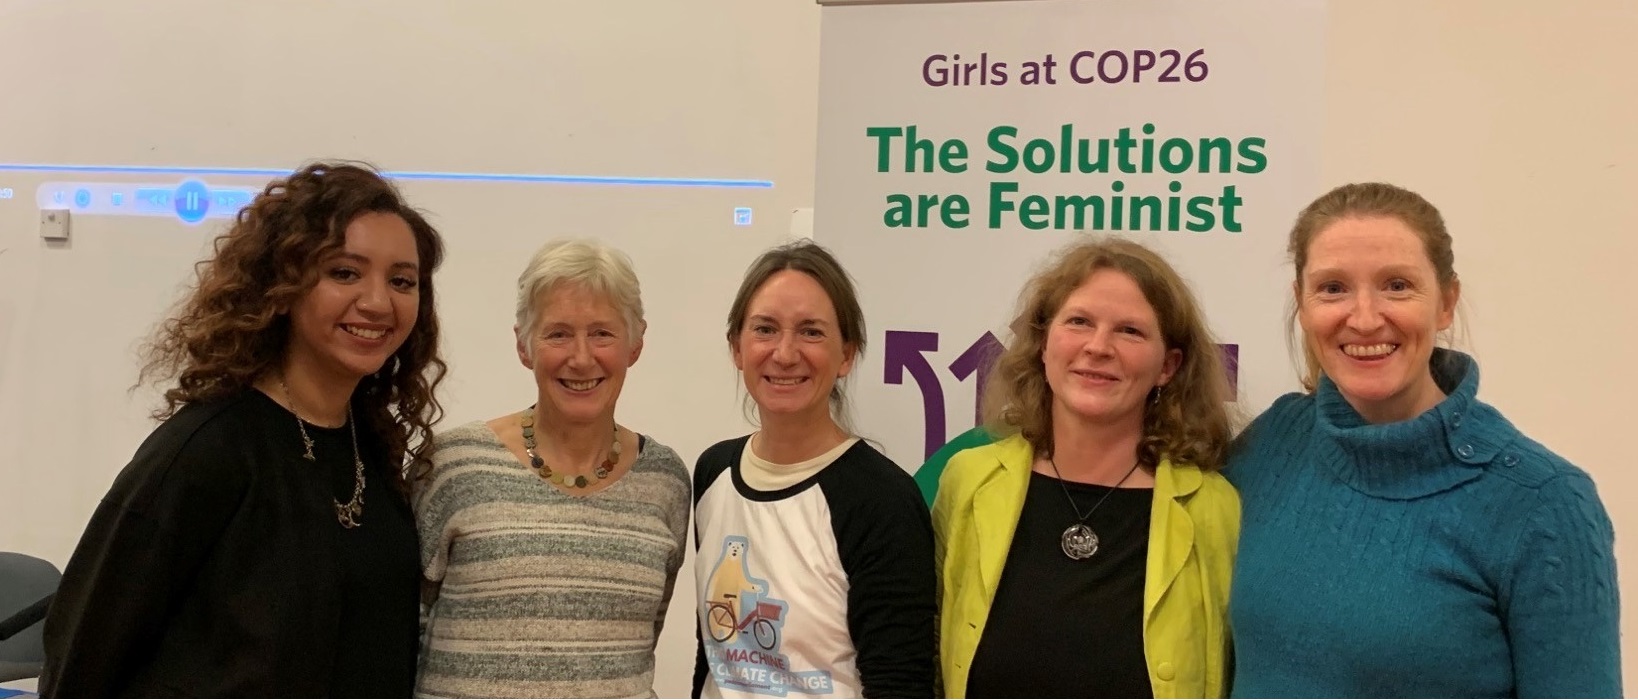 Women and girls at a feminist COP26 event for Glasgow schoolgirls